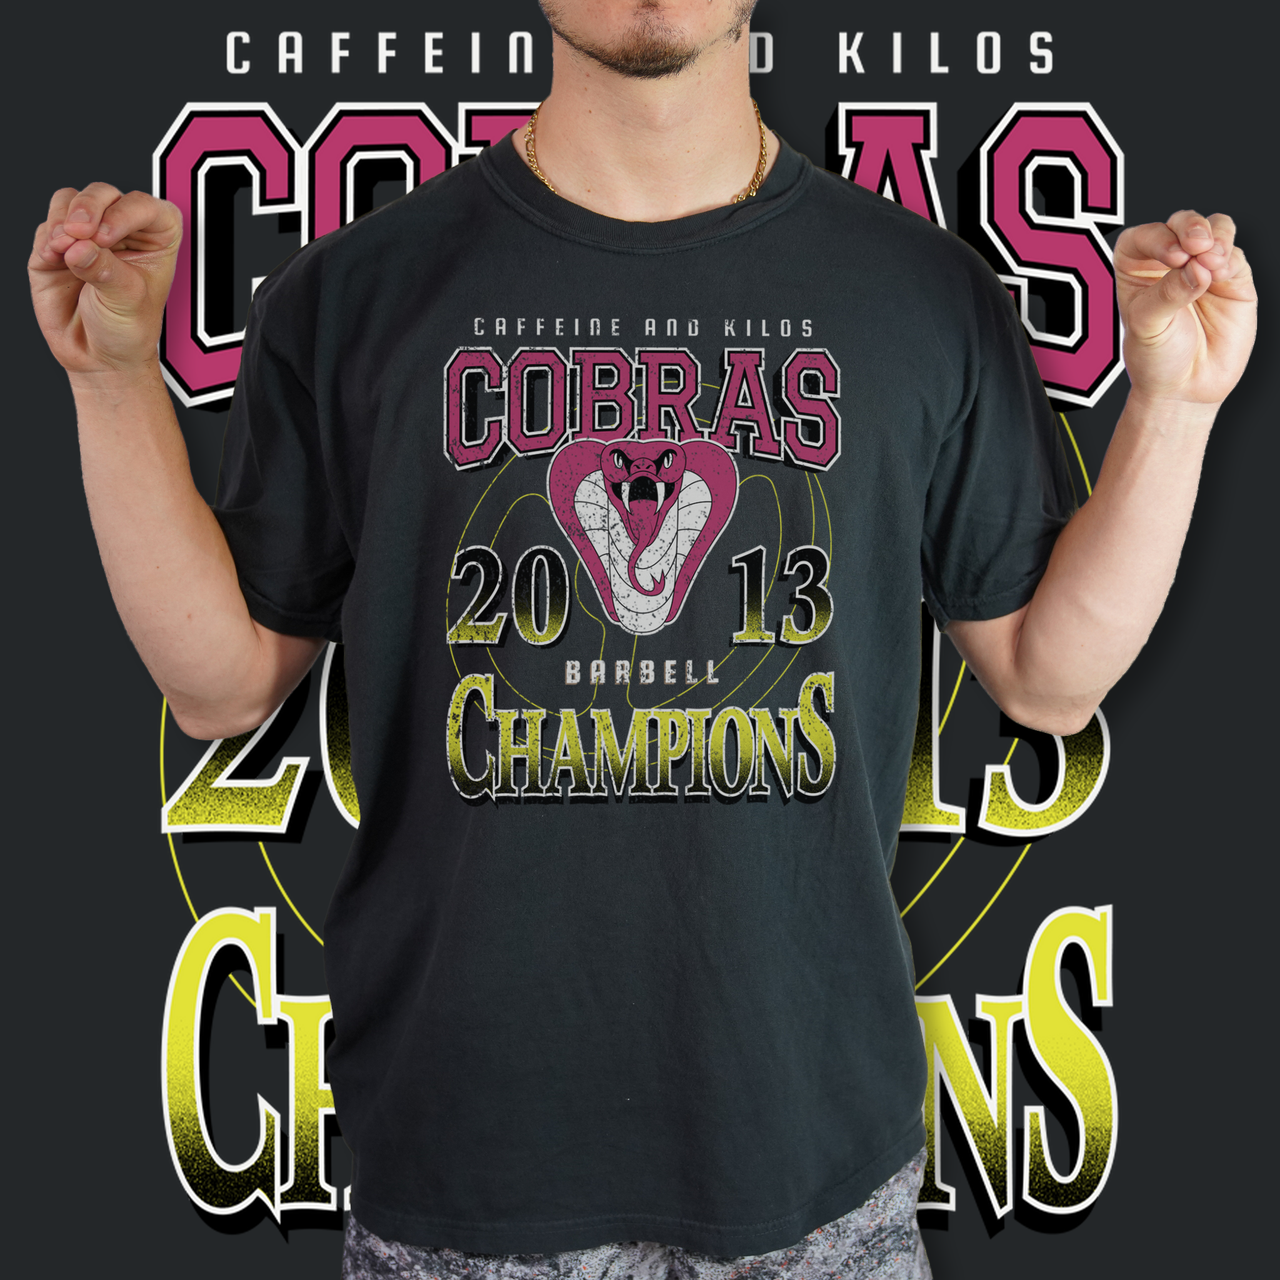 Champions Tee - Outlet